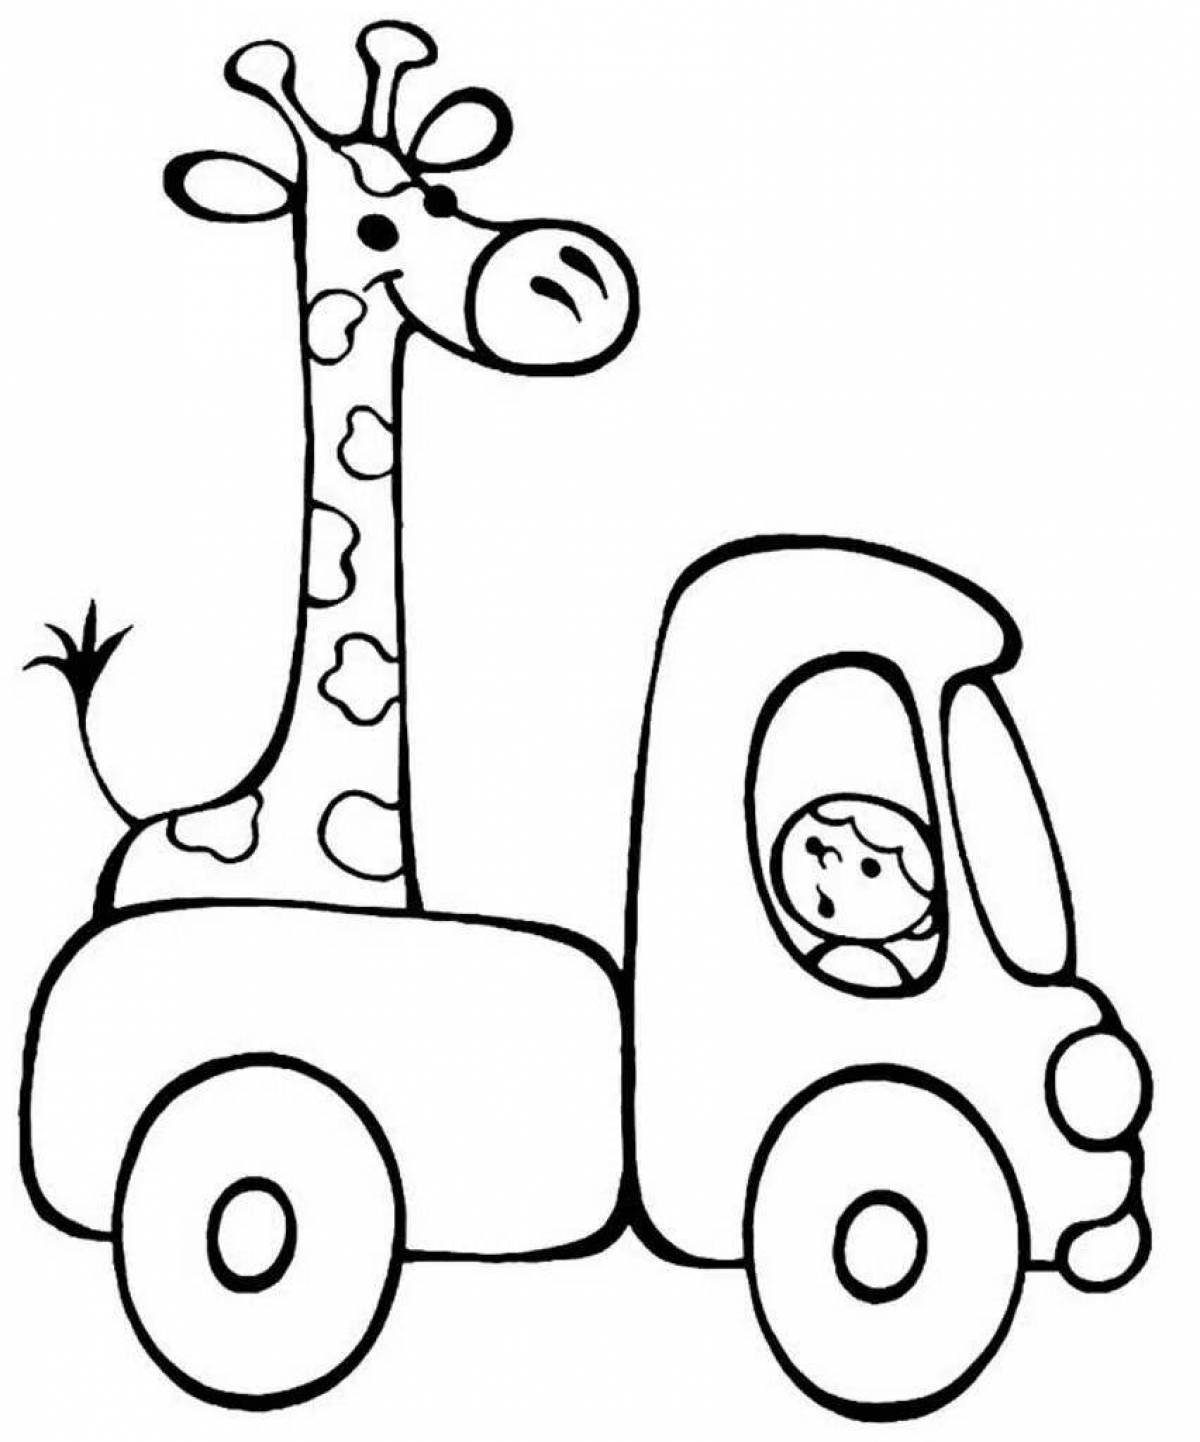 Exciting cars 2 coloring page